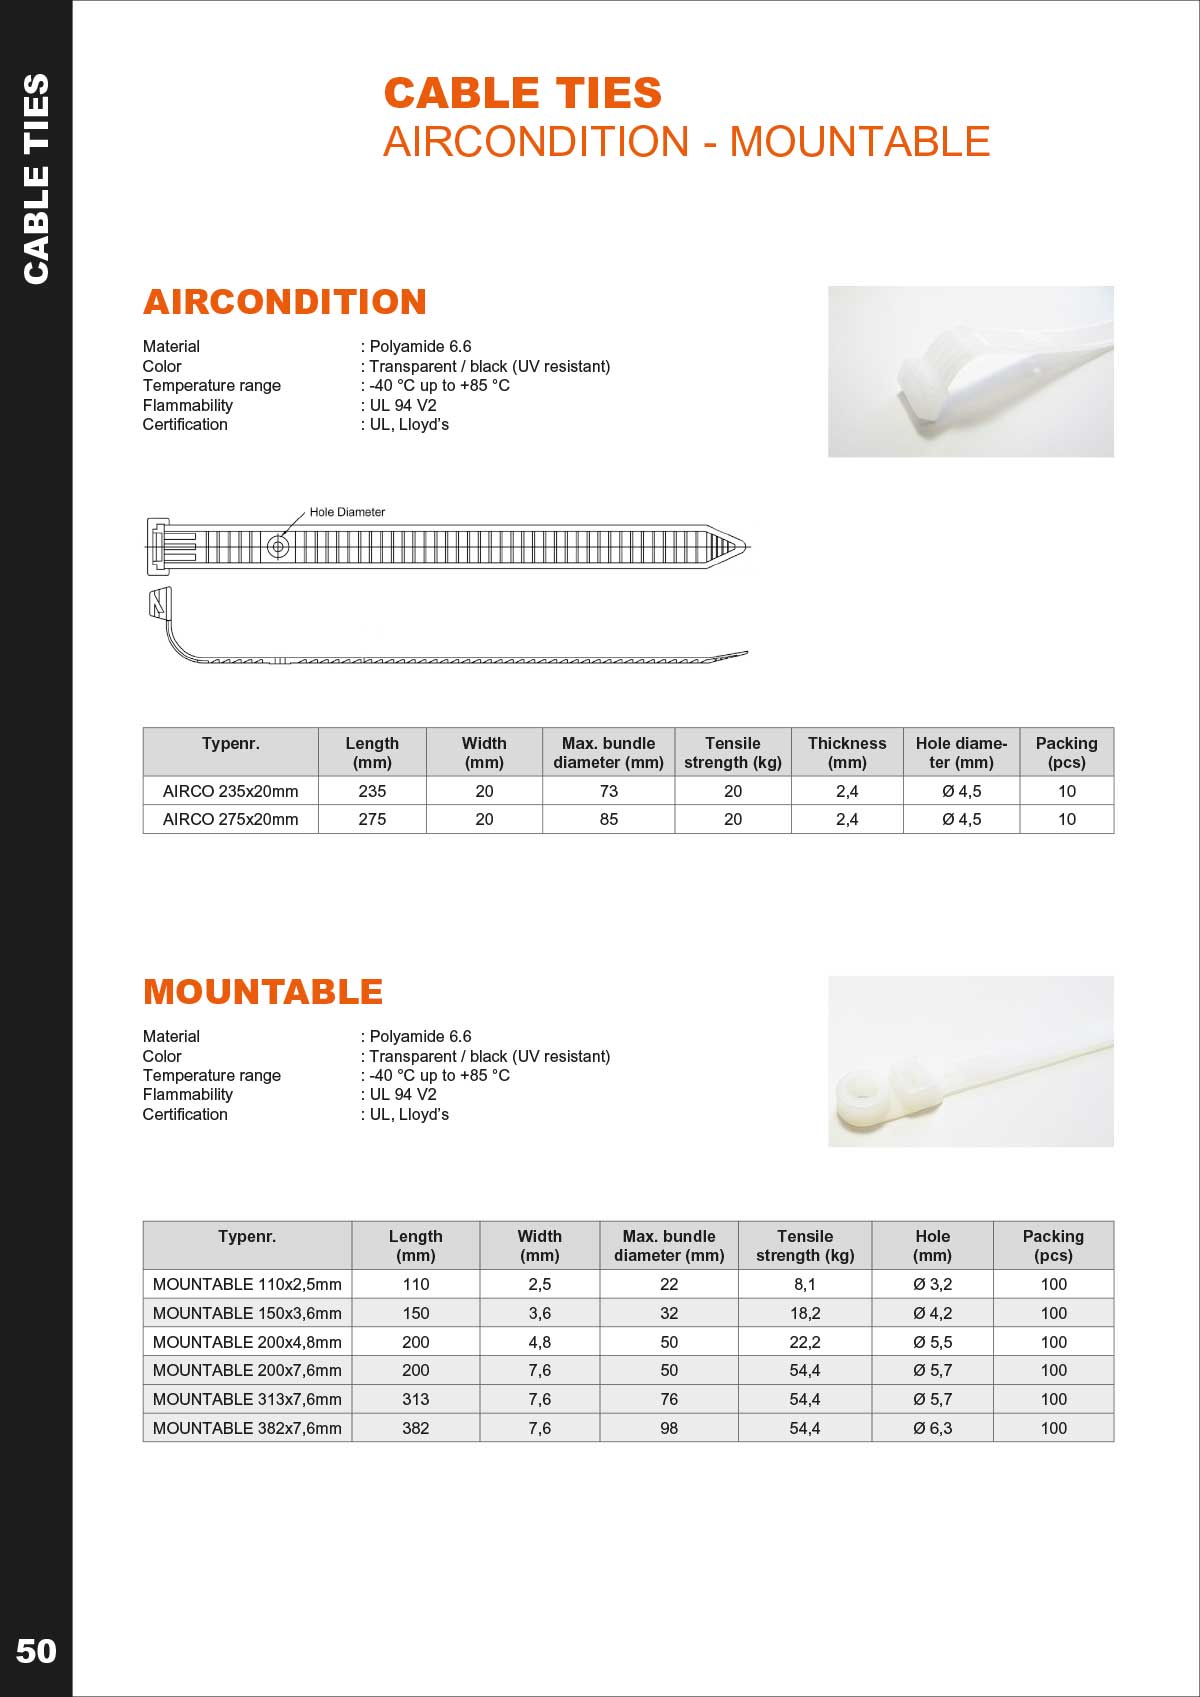 ATIE-Aircondition cable ties